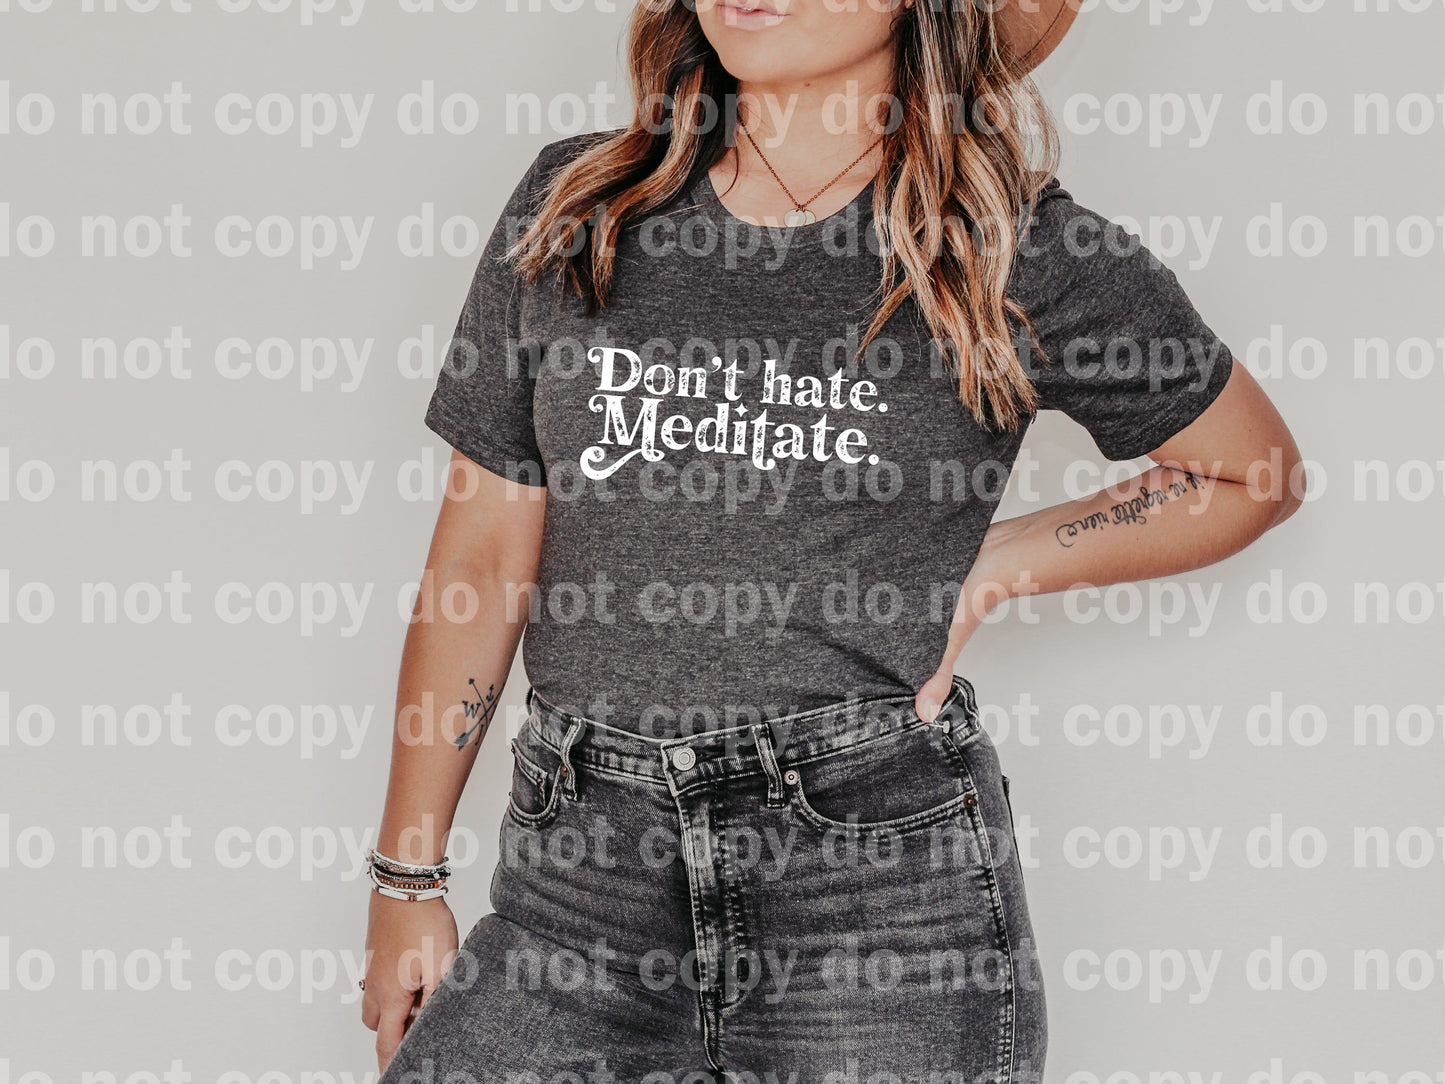 Don't Hate, Meditate Black/White Color Dream Print or Sublimation Print